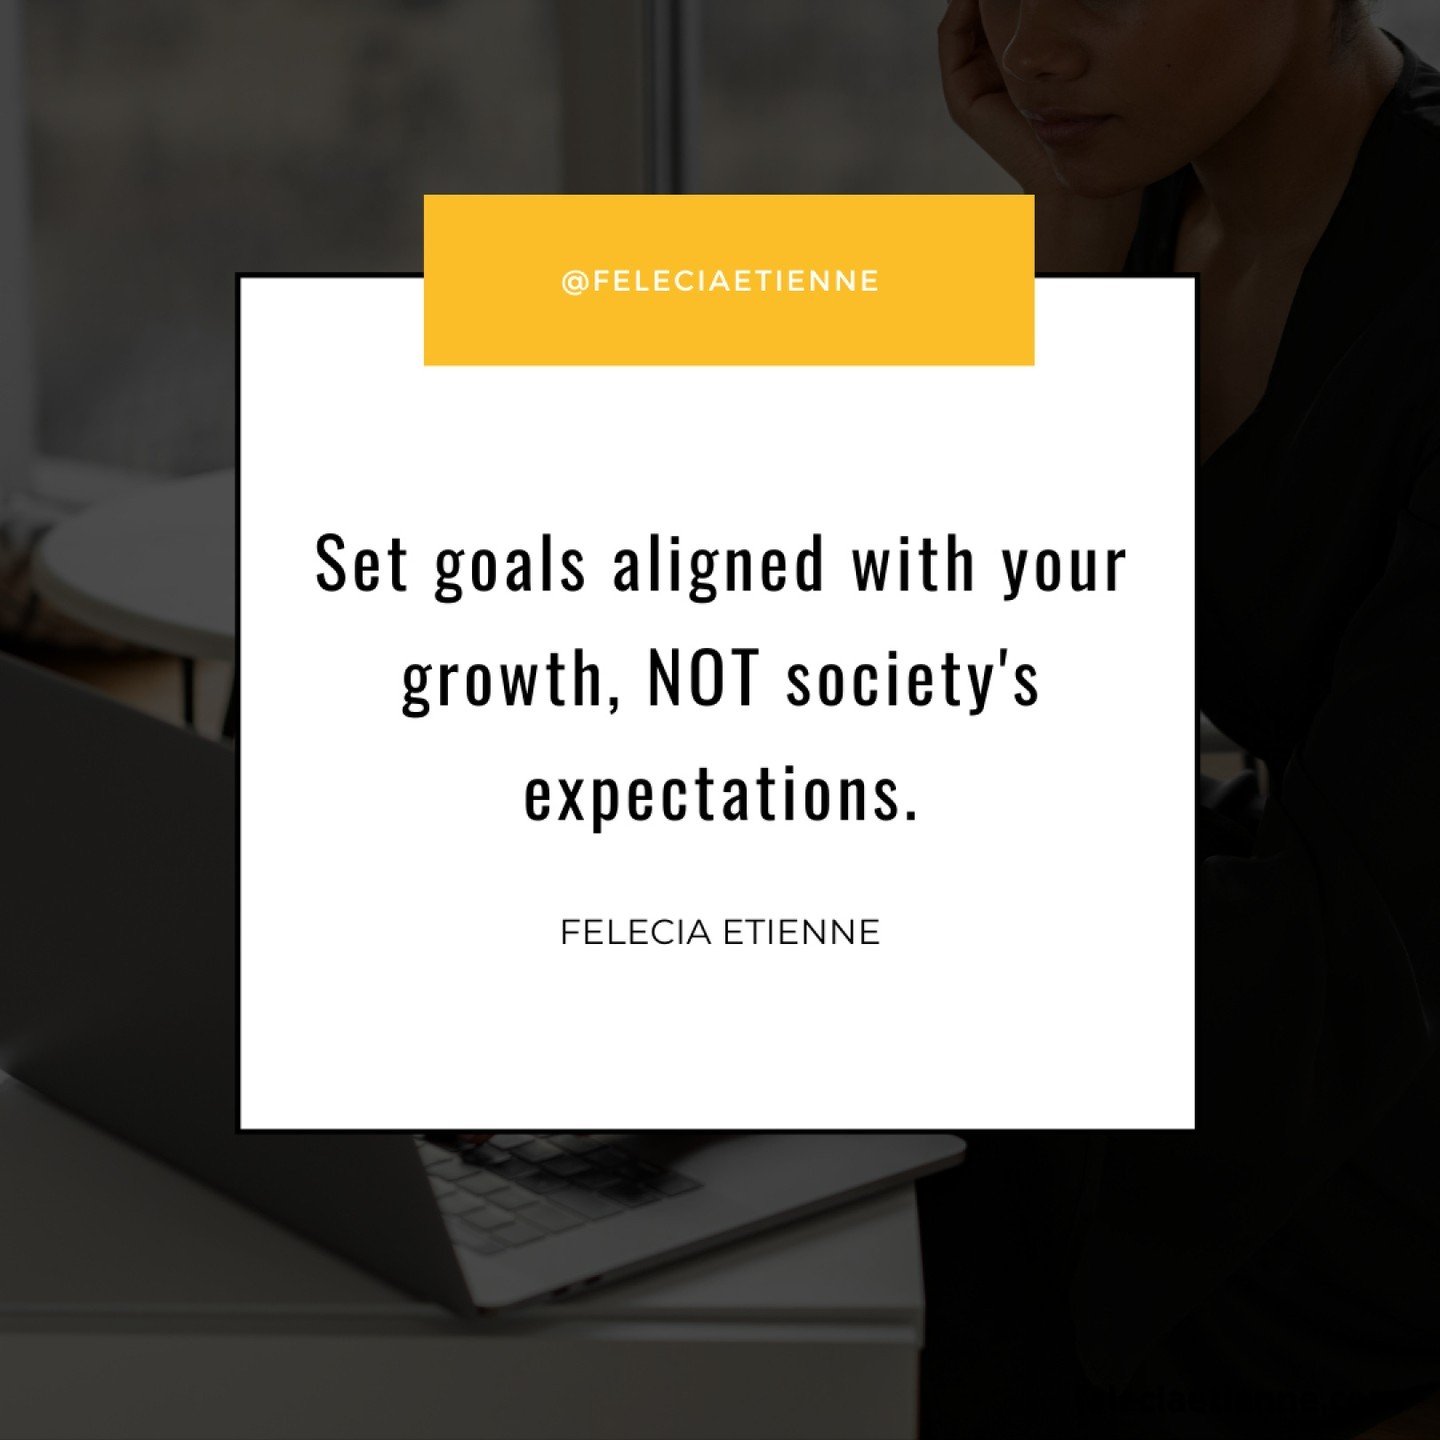 🌟 Let's talk goals: they should be all about your growth, not what society expects from you. 
⚡️ It's easy to get caught up in chasing what everyone else thinks you should do, but your journey is yours alone. 🌱
💡 So, set goals that light you up, t